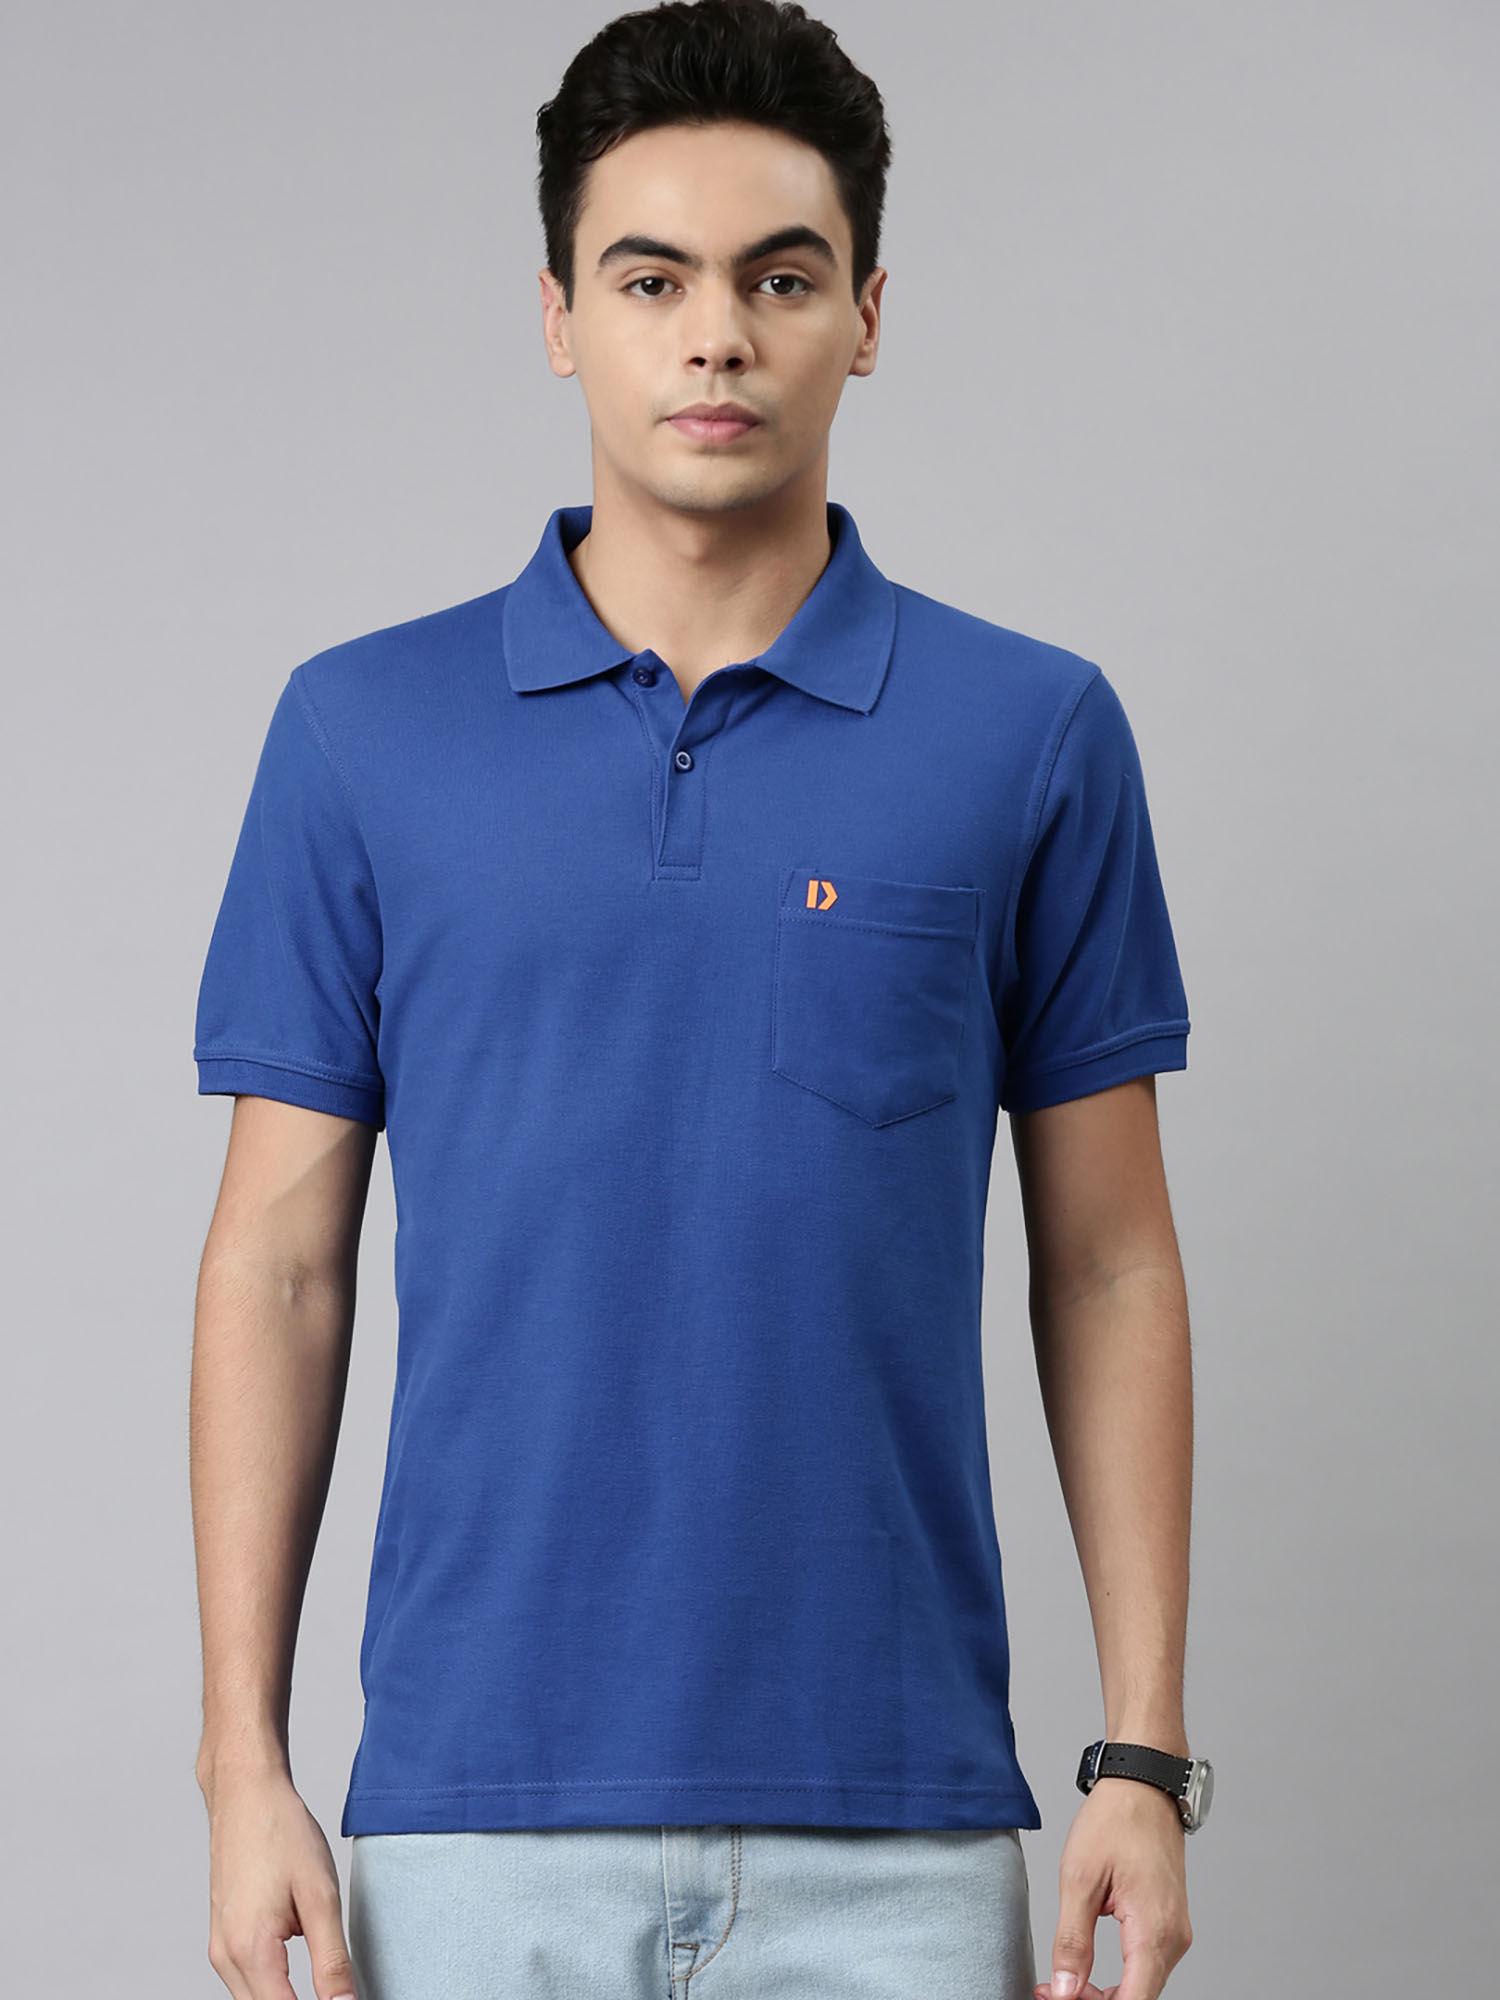 maximus mens anti microbial finish polo neck short sleeves solid t-shirt blue